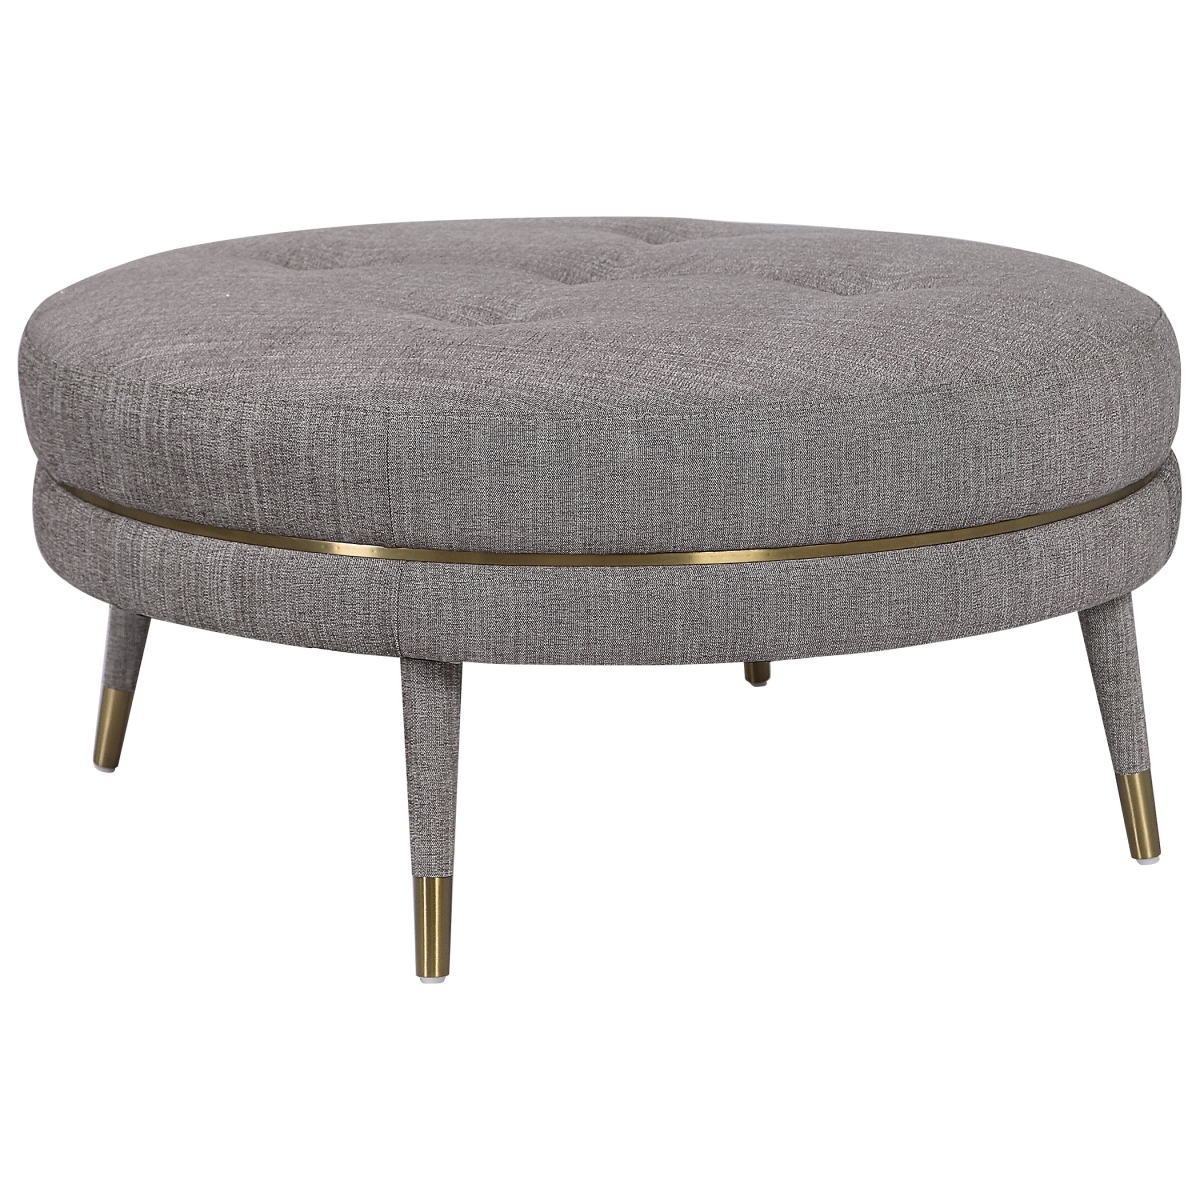 Picture of 212 Main 23524 Blake Modern Taupe Ottoman